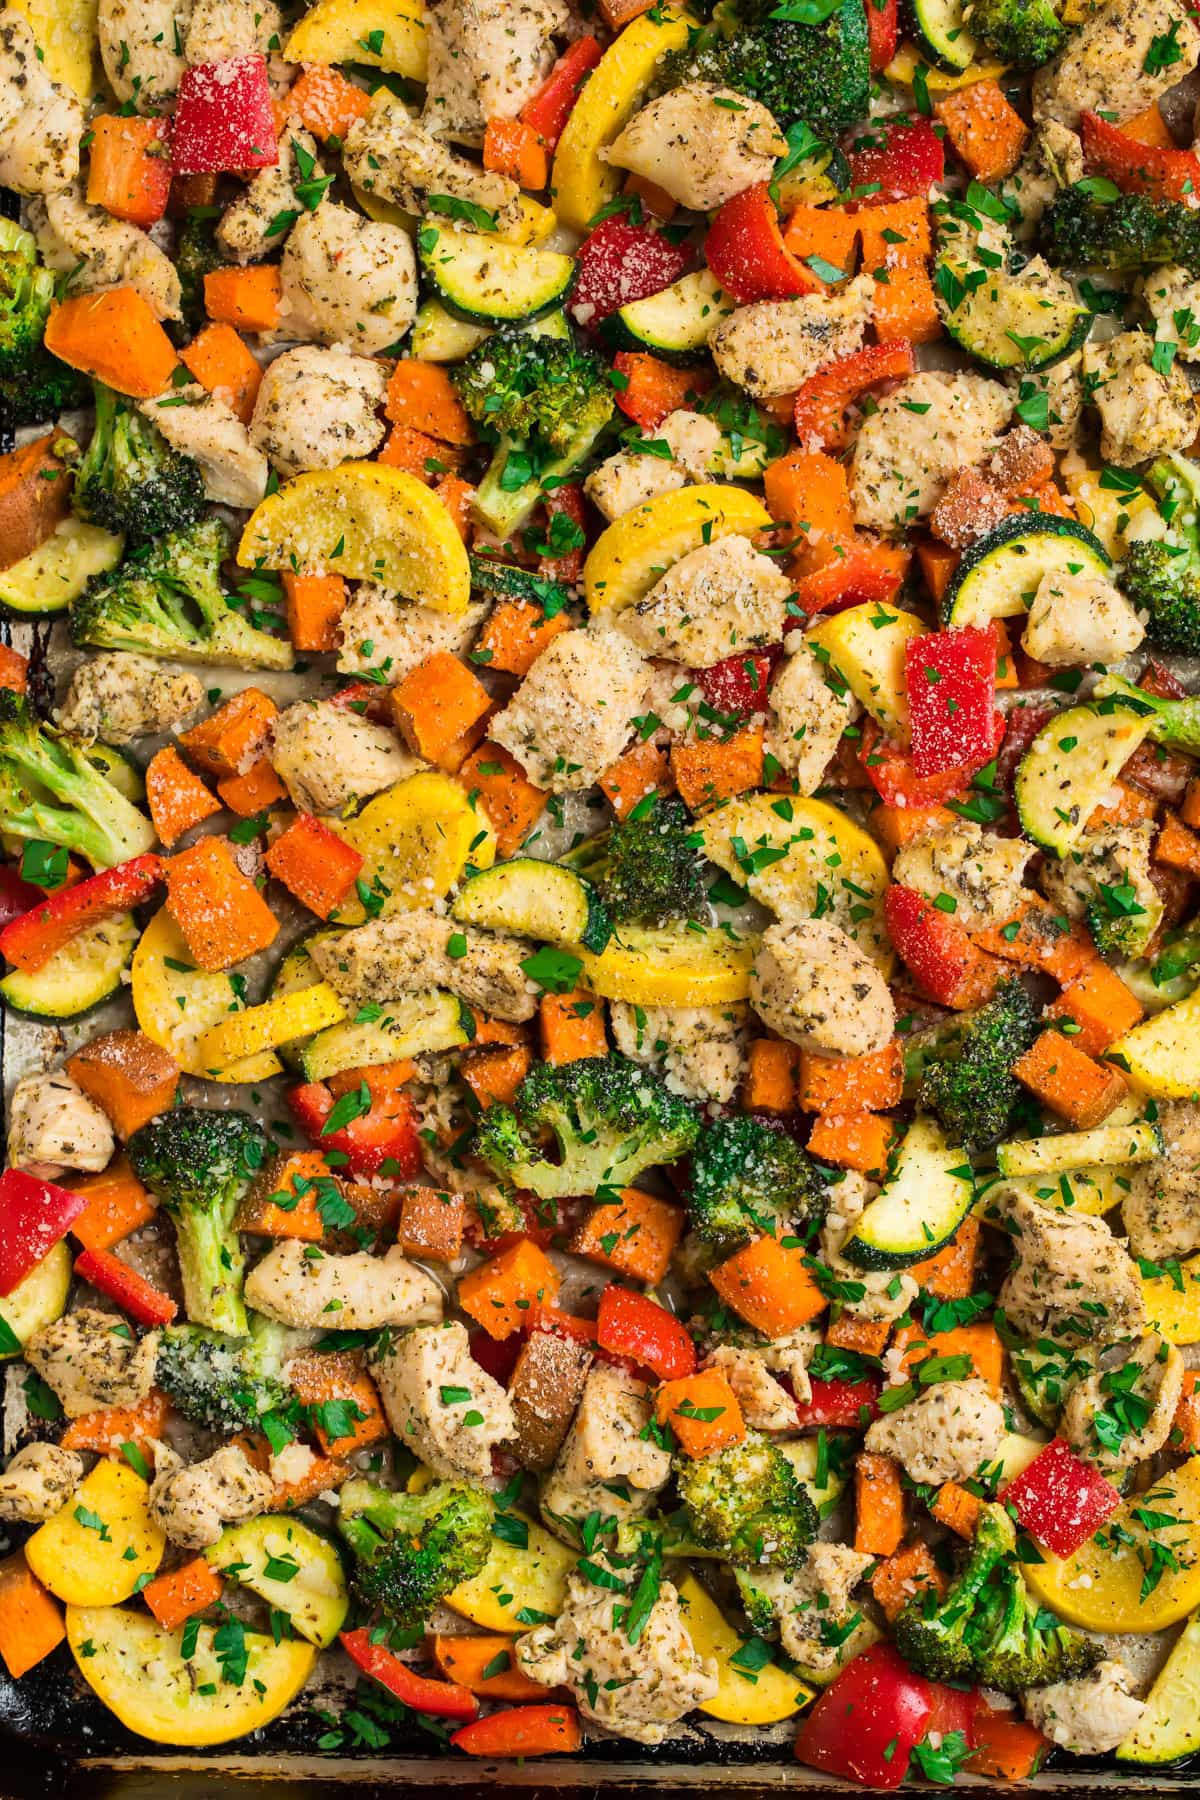 Chicken and vegetables on a baking sheet